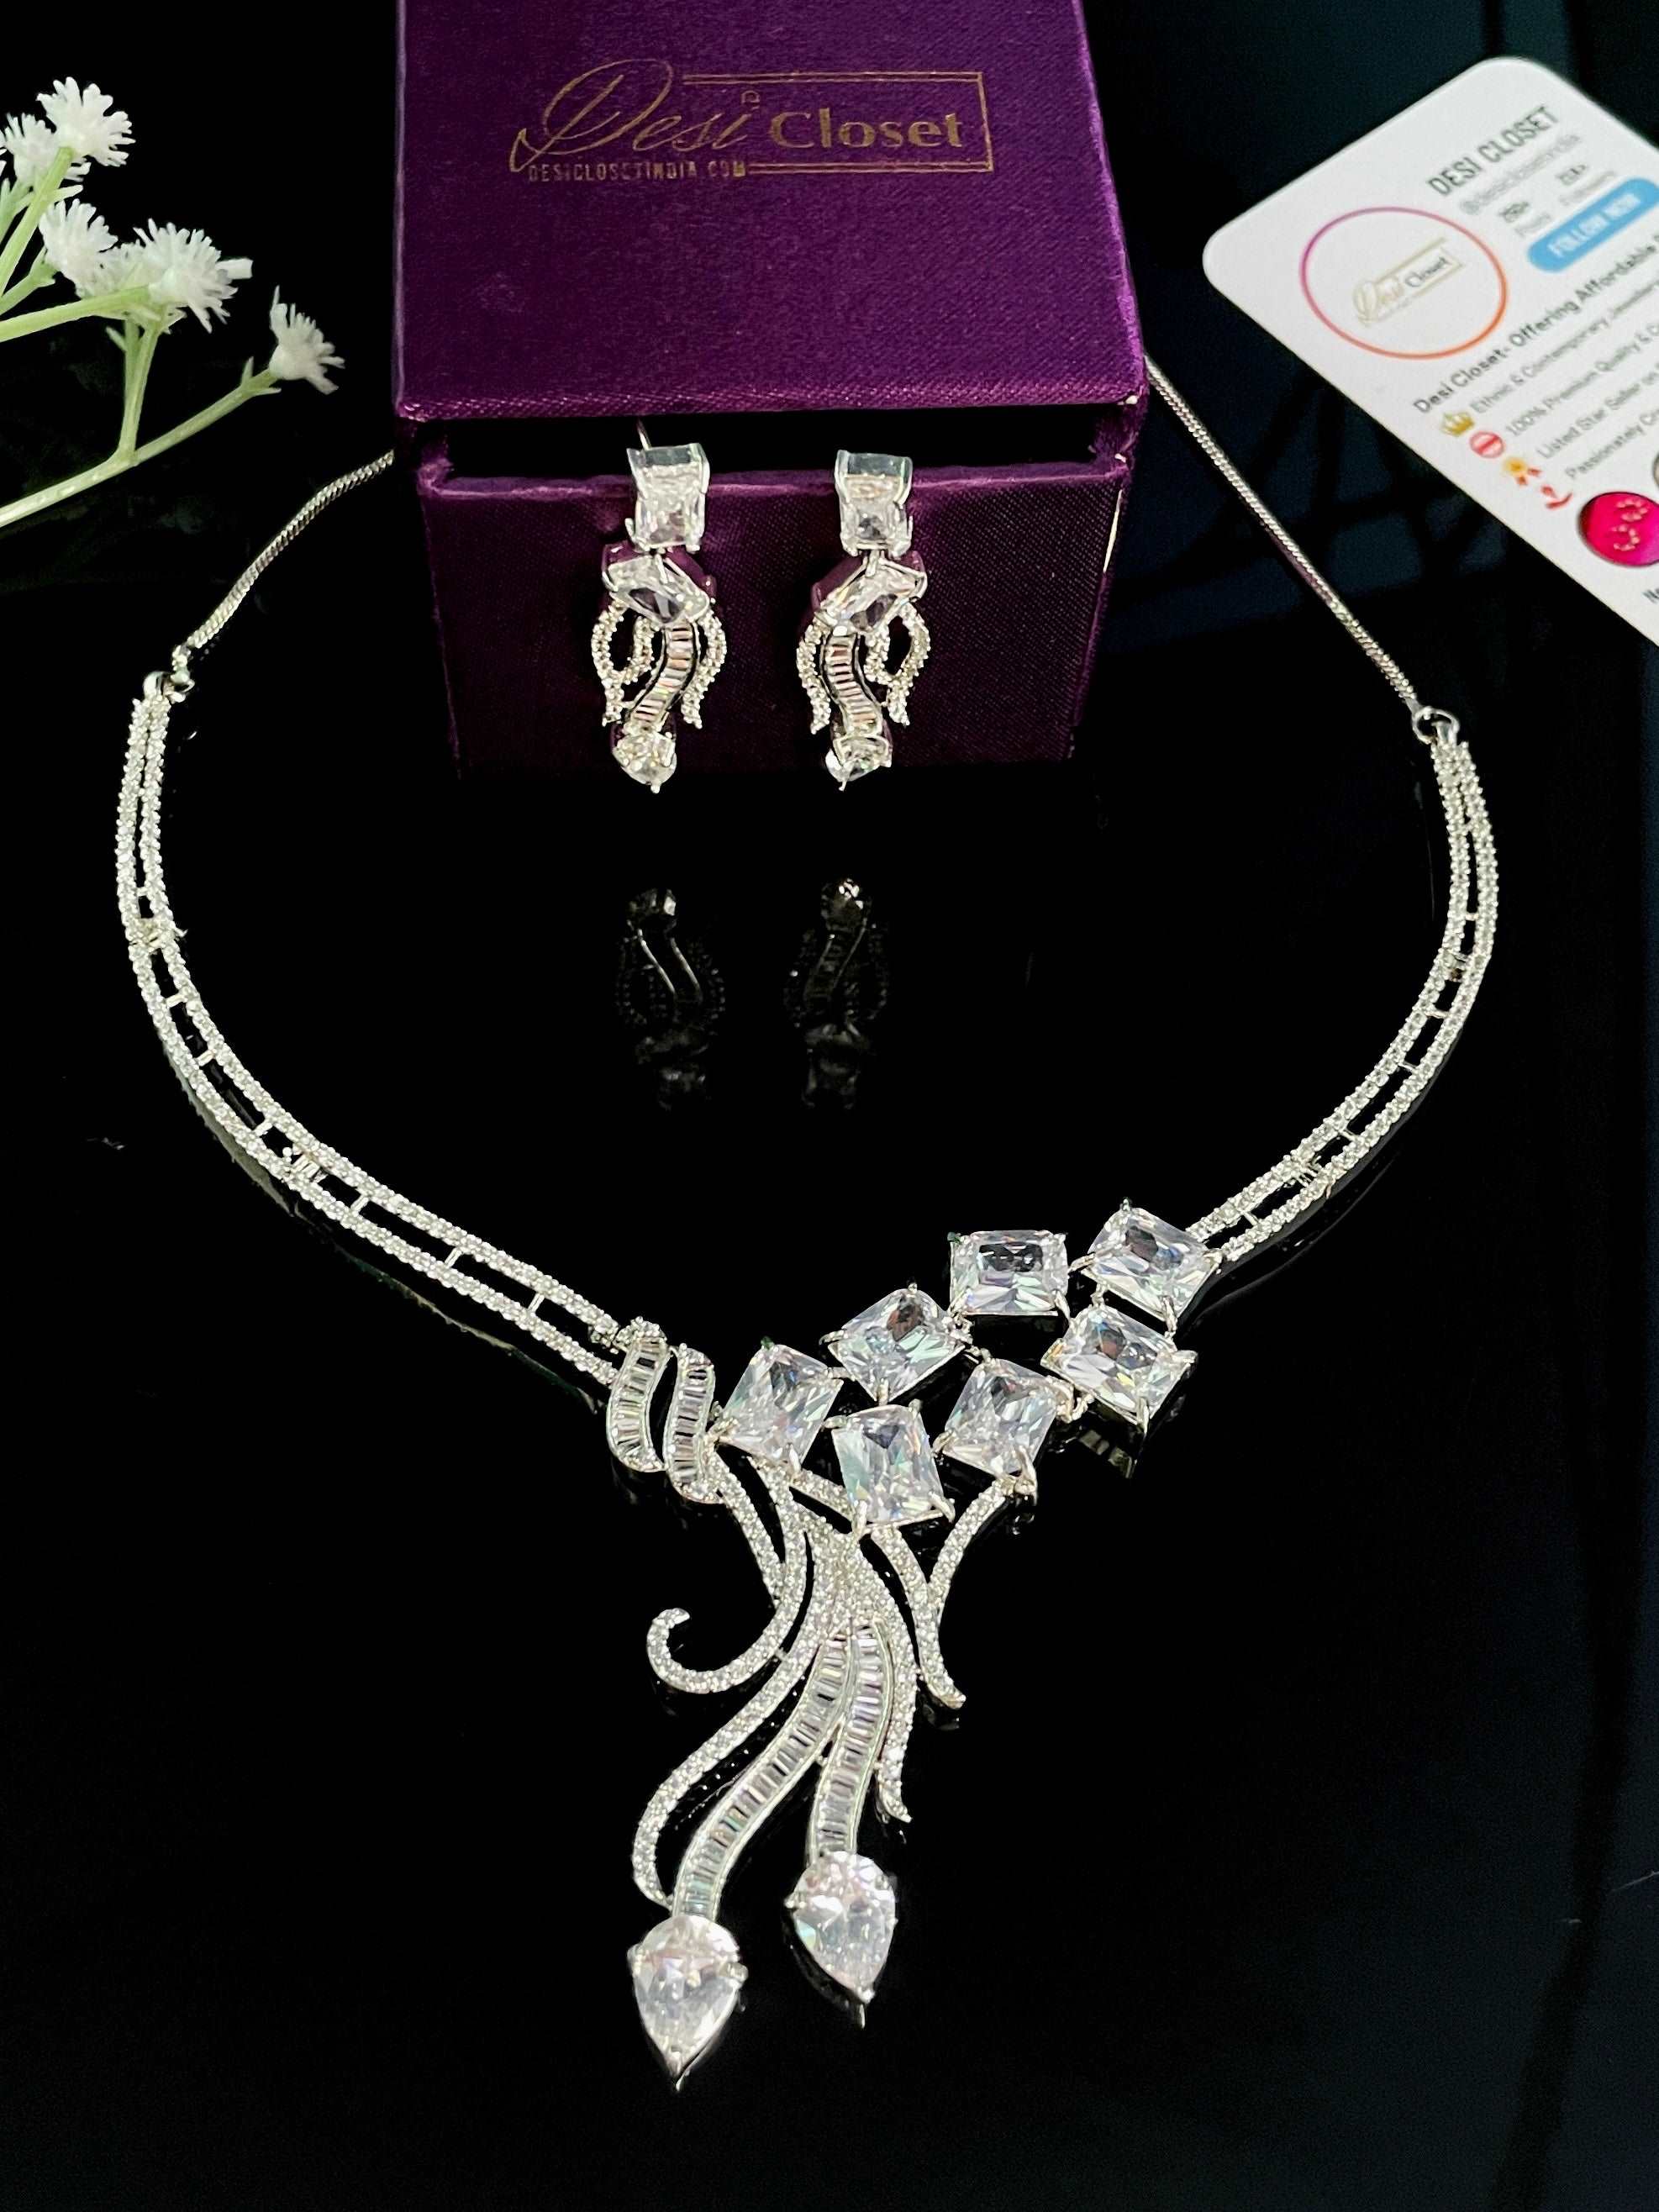 AD Contemporary Sleek One Side Extended Necklace With Sleek CZ Earrings - Desi Closet